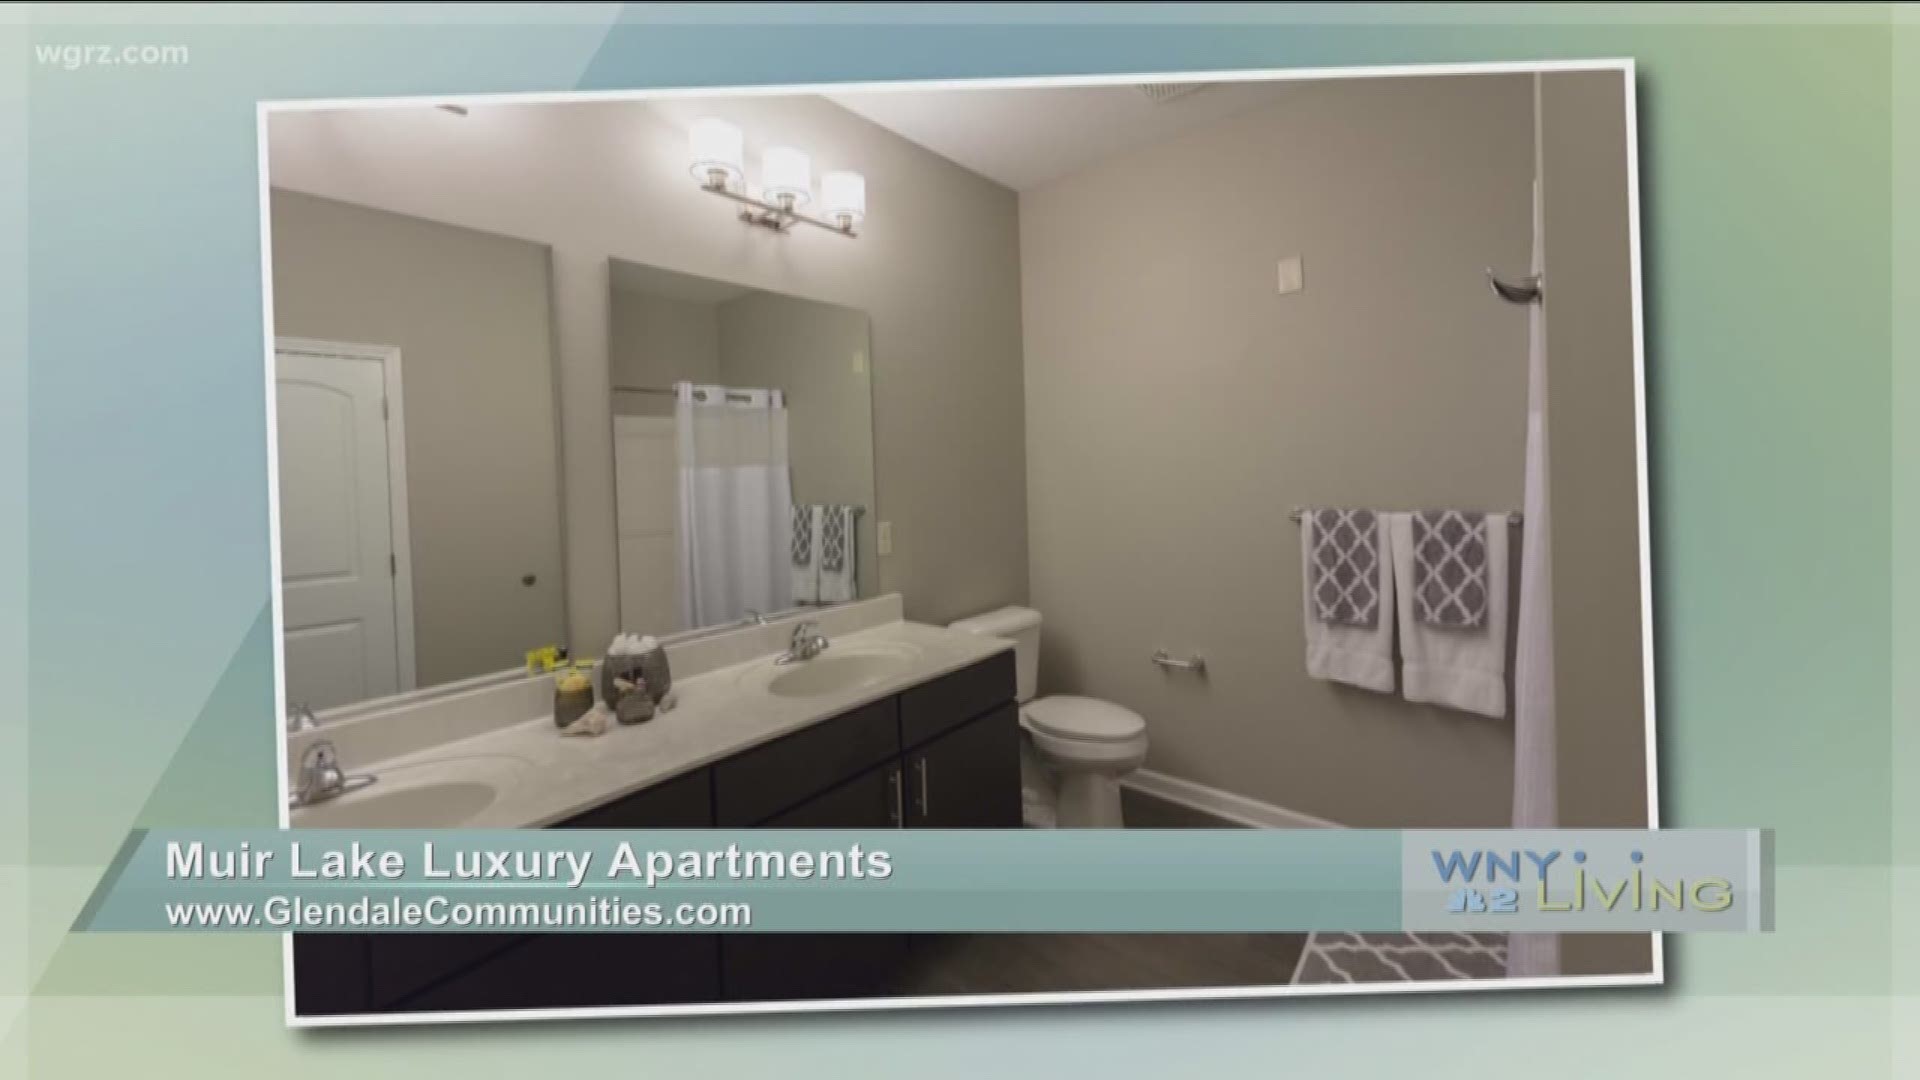 WNY Living - May 14 - WECK Muir Lake Luxury Apartments